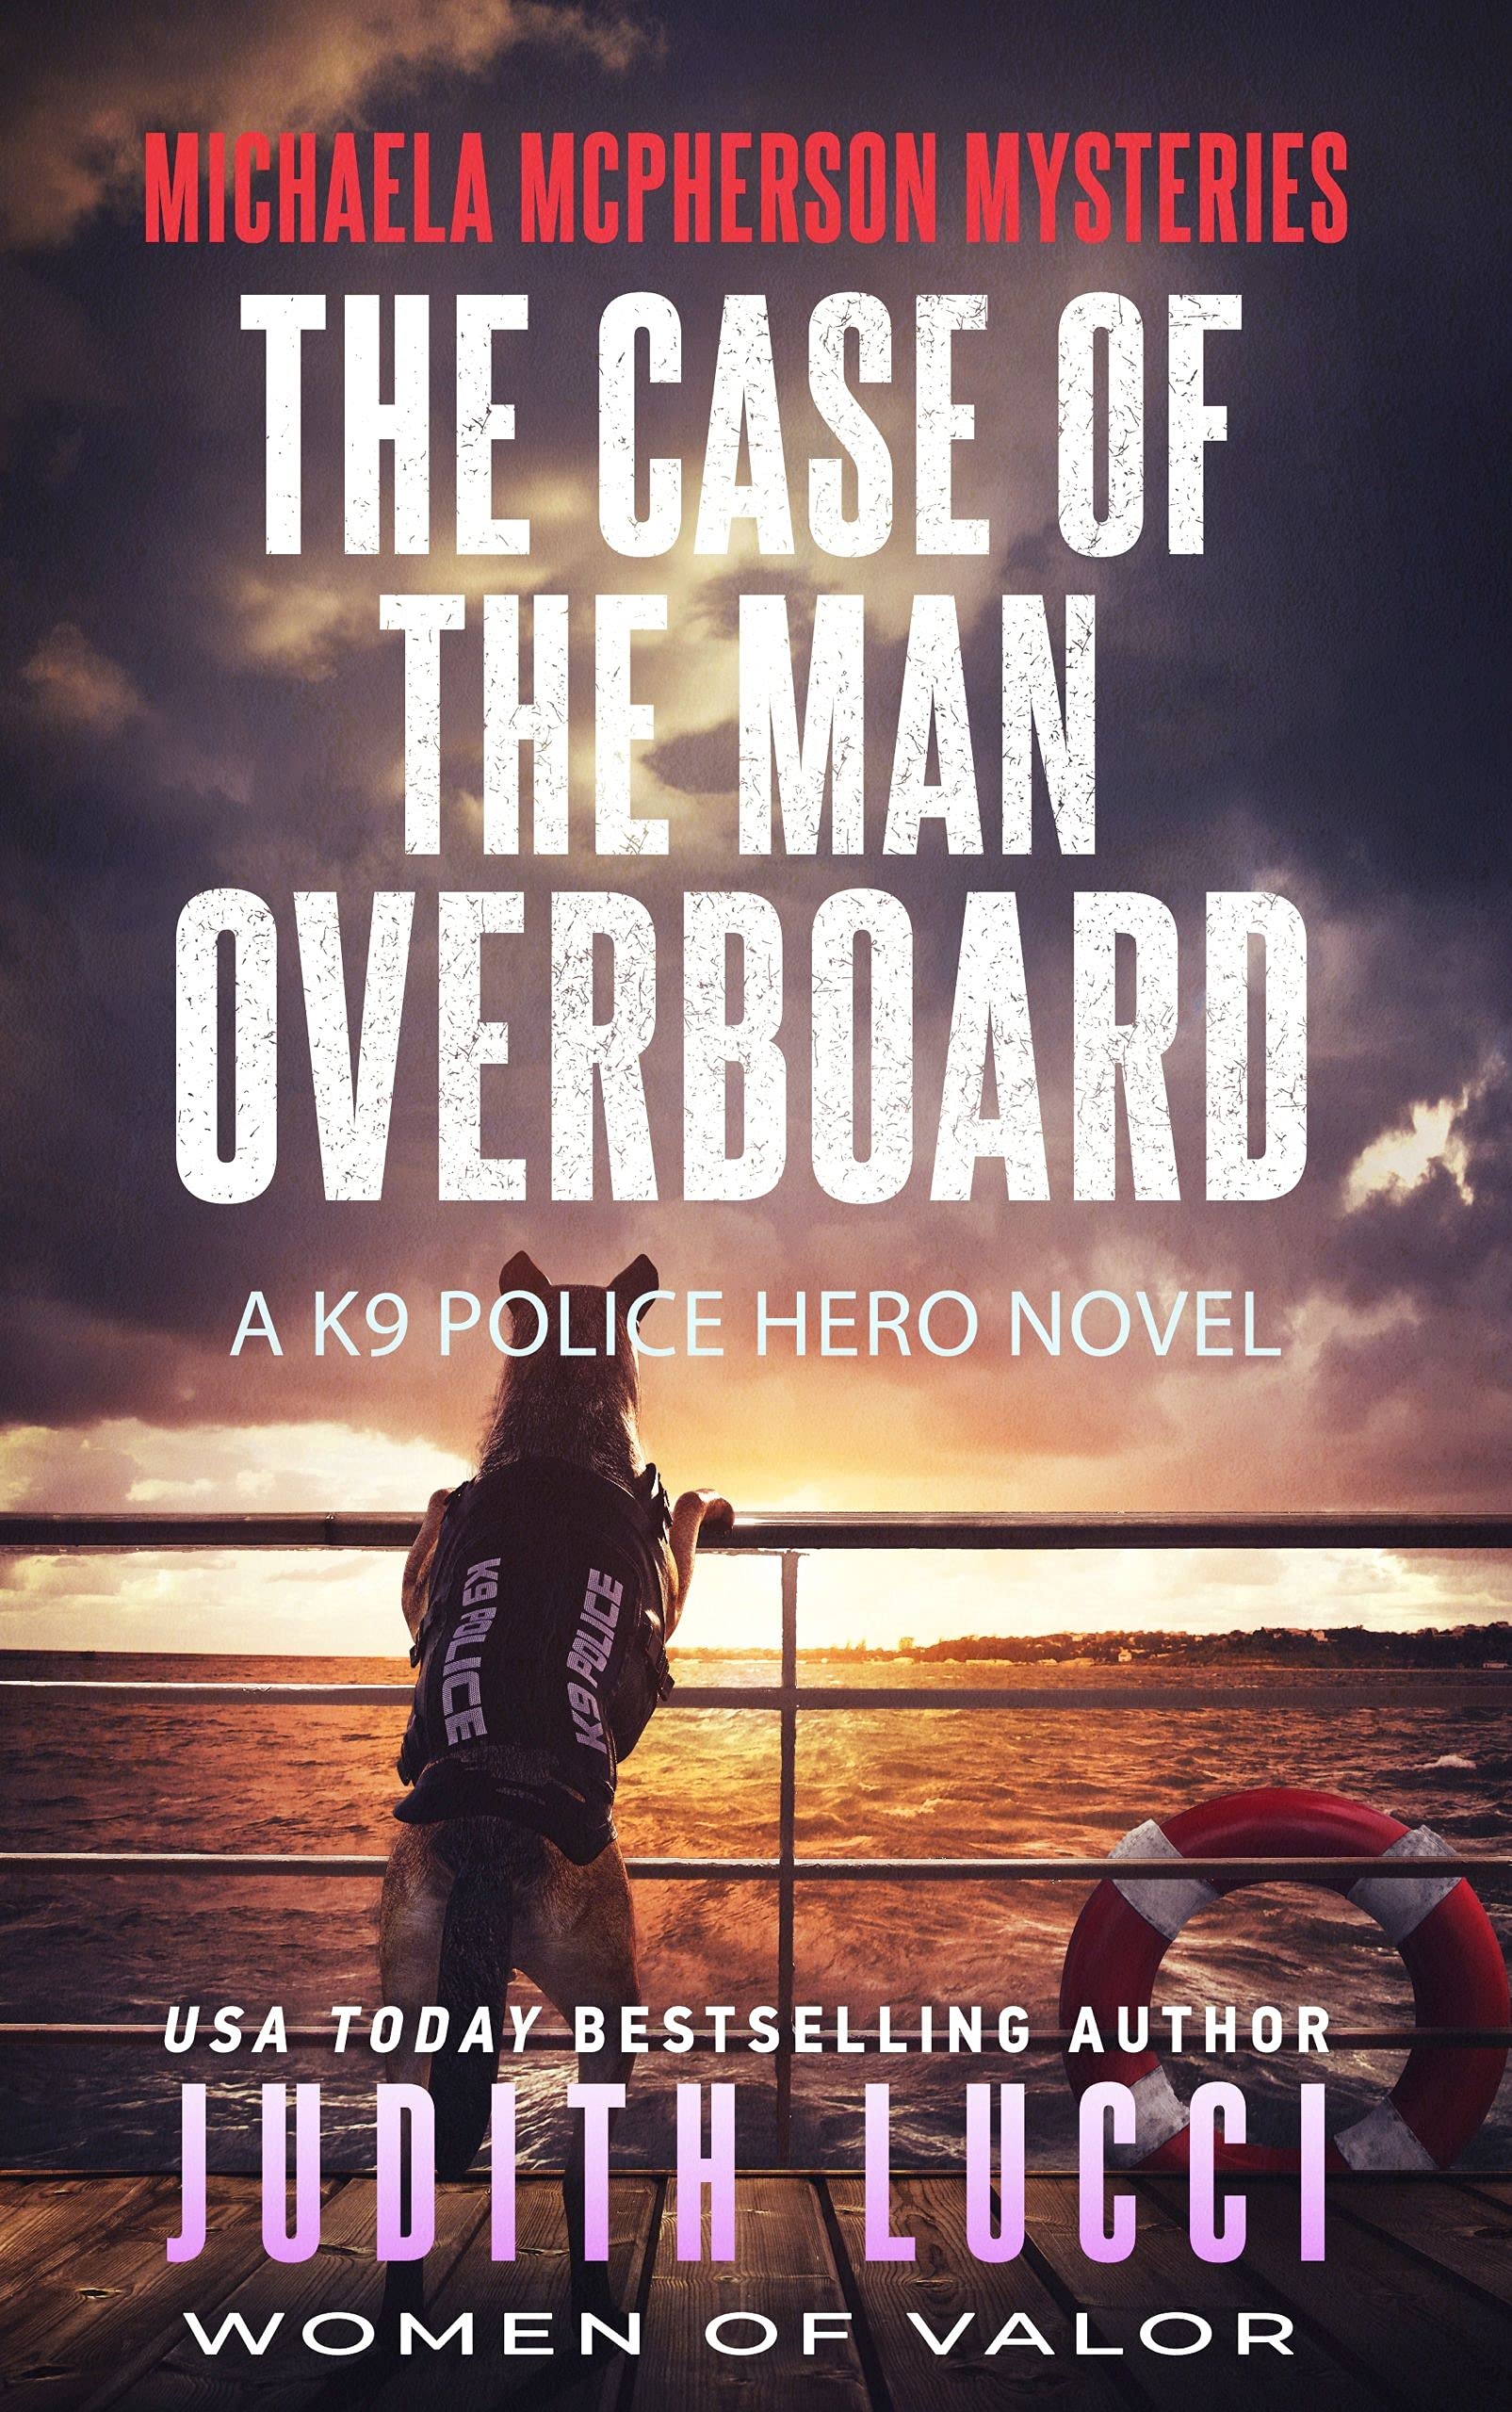 Book Cover The Case of the Man Overboard: A K9 Police Hero Novel (Woman of Valor) (Michaela McPherson Mysteries Book 3)